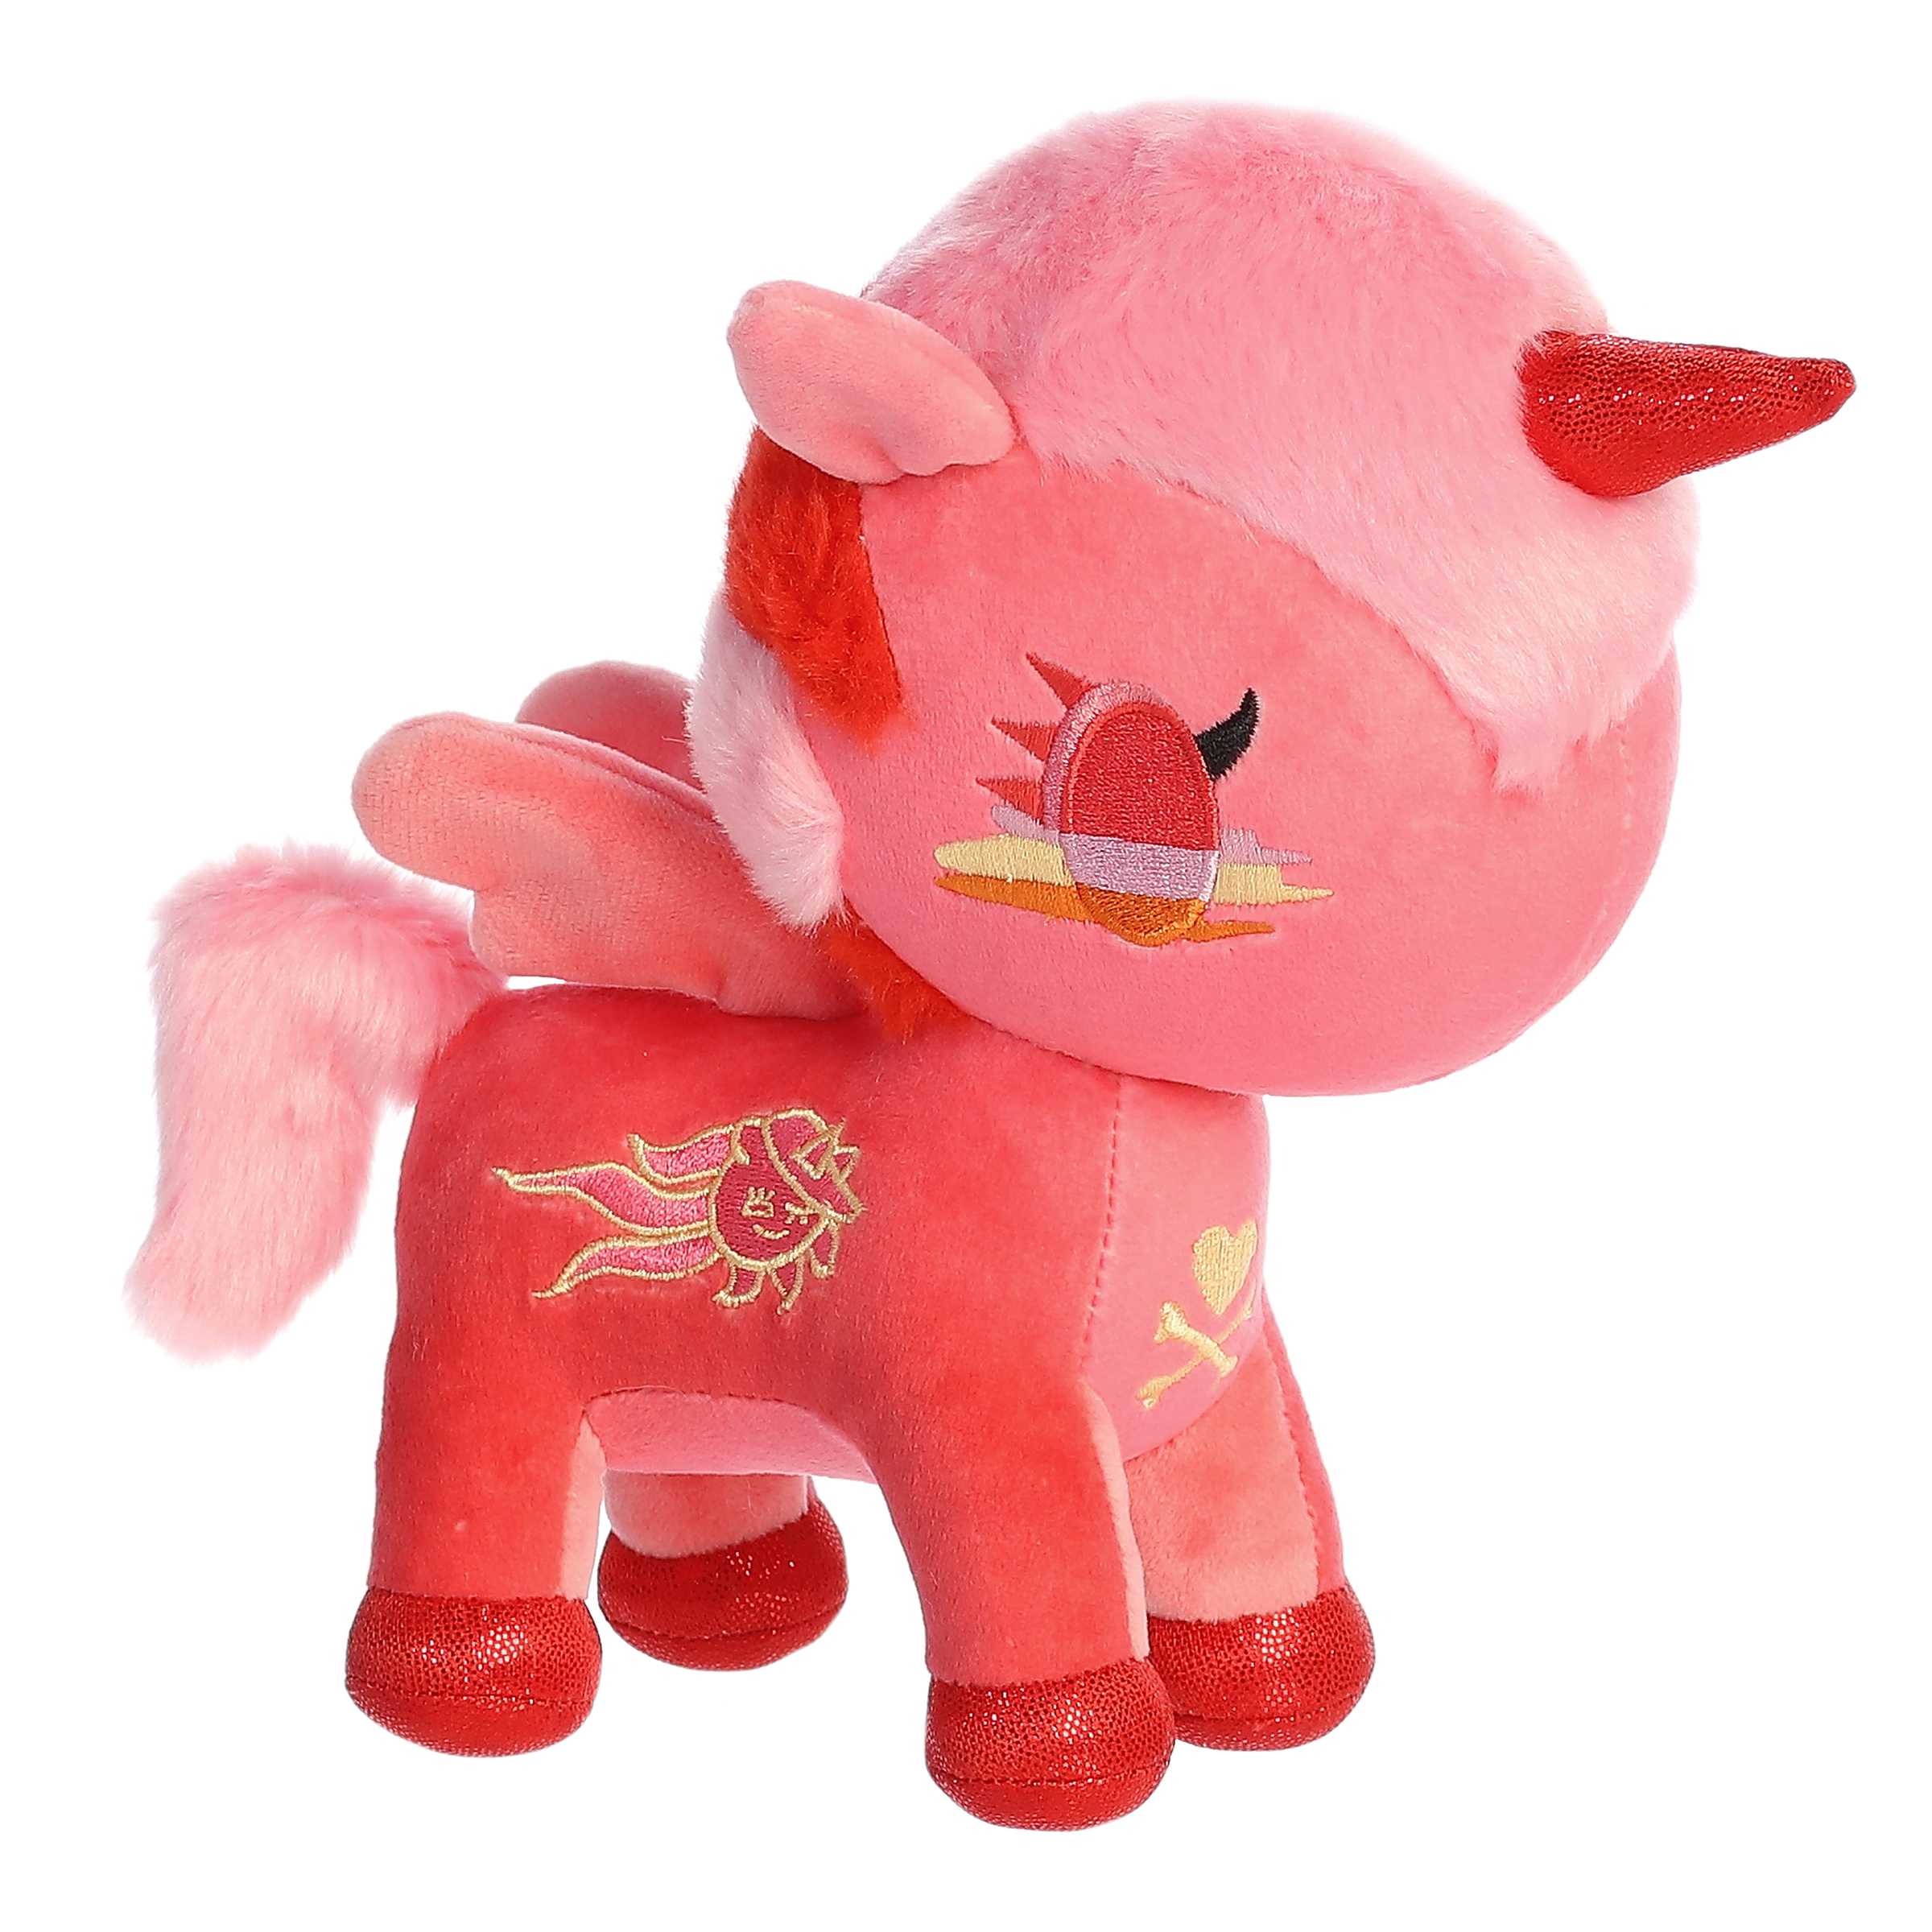 Toki Mochi Unicorno Alba plush in bright red with pink mane, magical horn, and red wings, ready for cuddles.